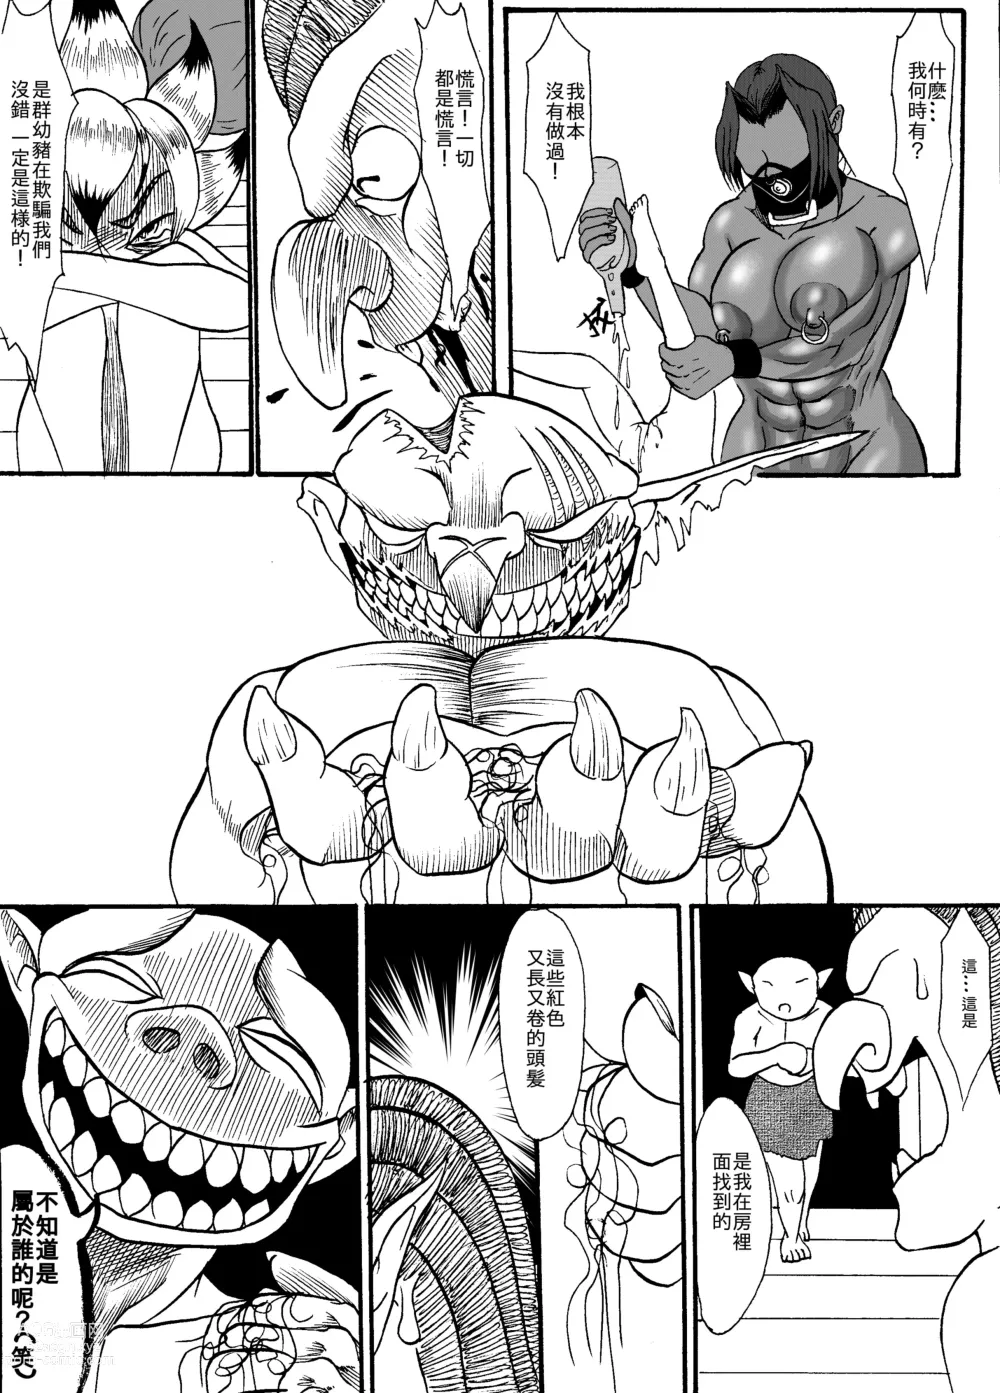 Page 22 of manga 哥布林傳奇7 Goblin Legend Chapter